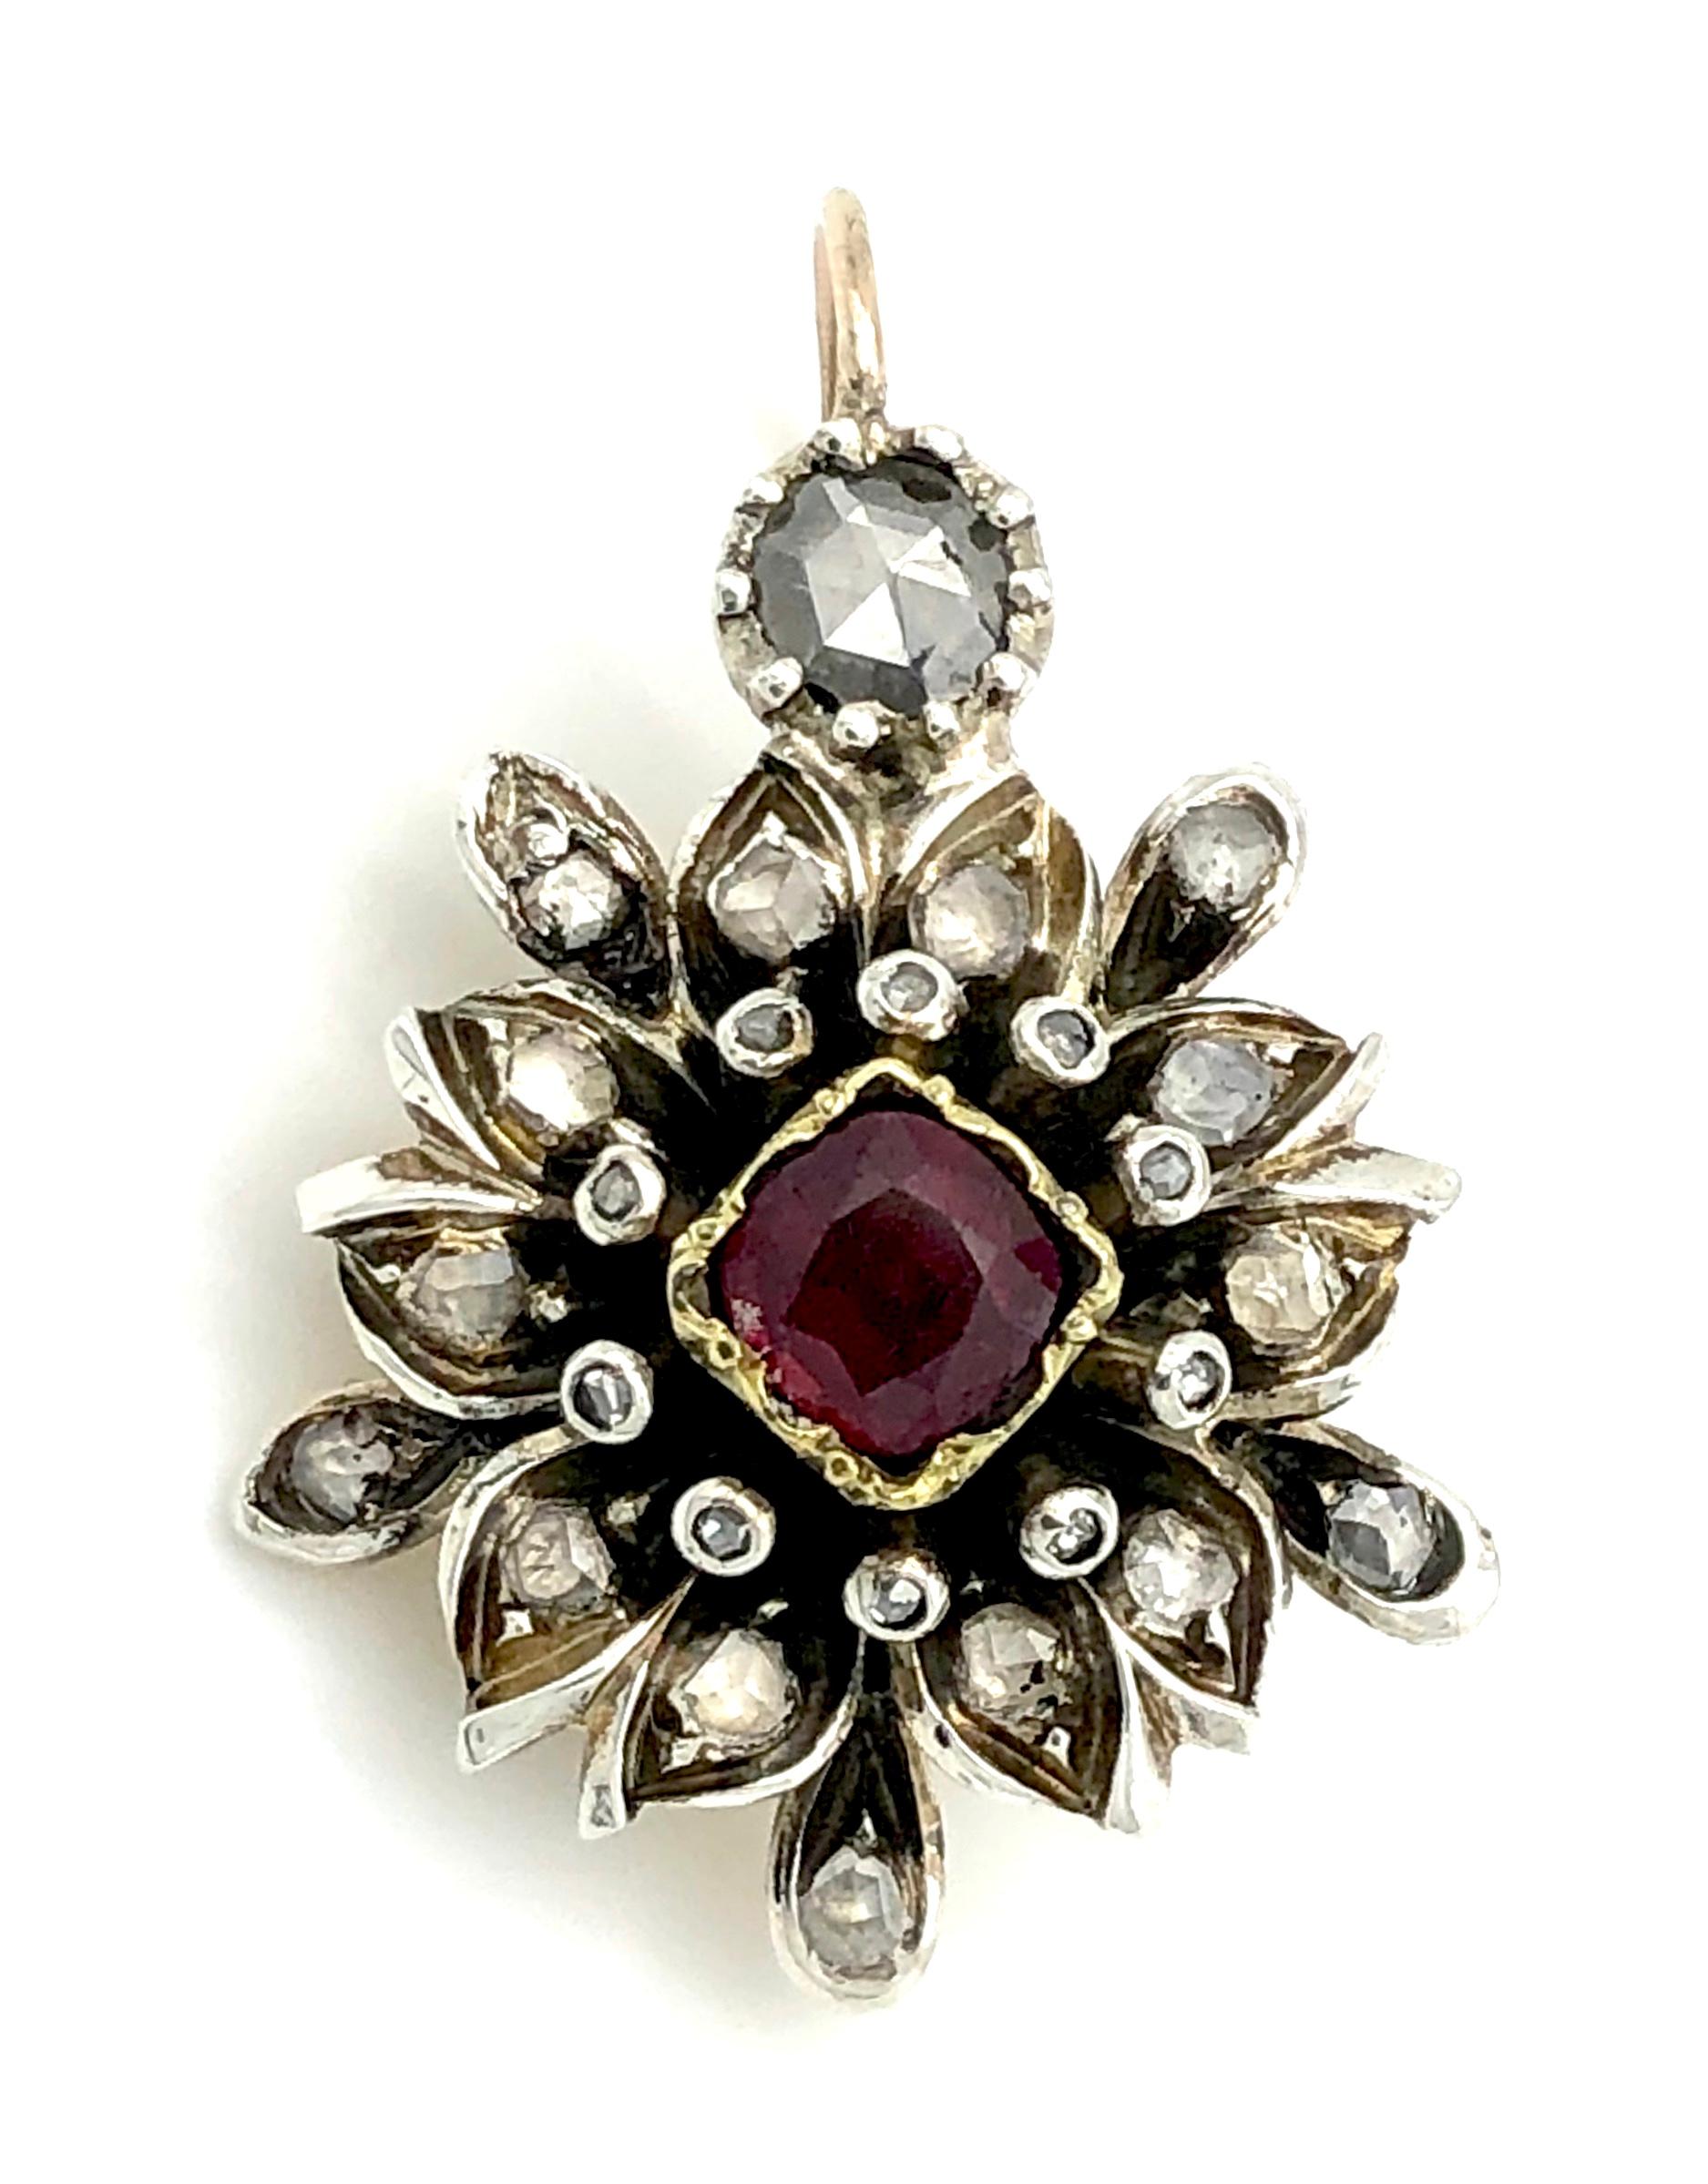 Antique silver gold-backed earrings in the shape of flowers are set with one large old cut old mine diamond. Small diamonds decorate the leaves. The hooks are 14 karat gold. One large square-cut deep red ruby is set in each flower centre. The rubies